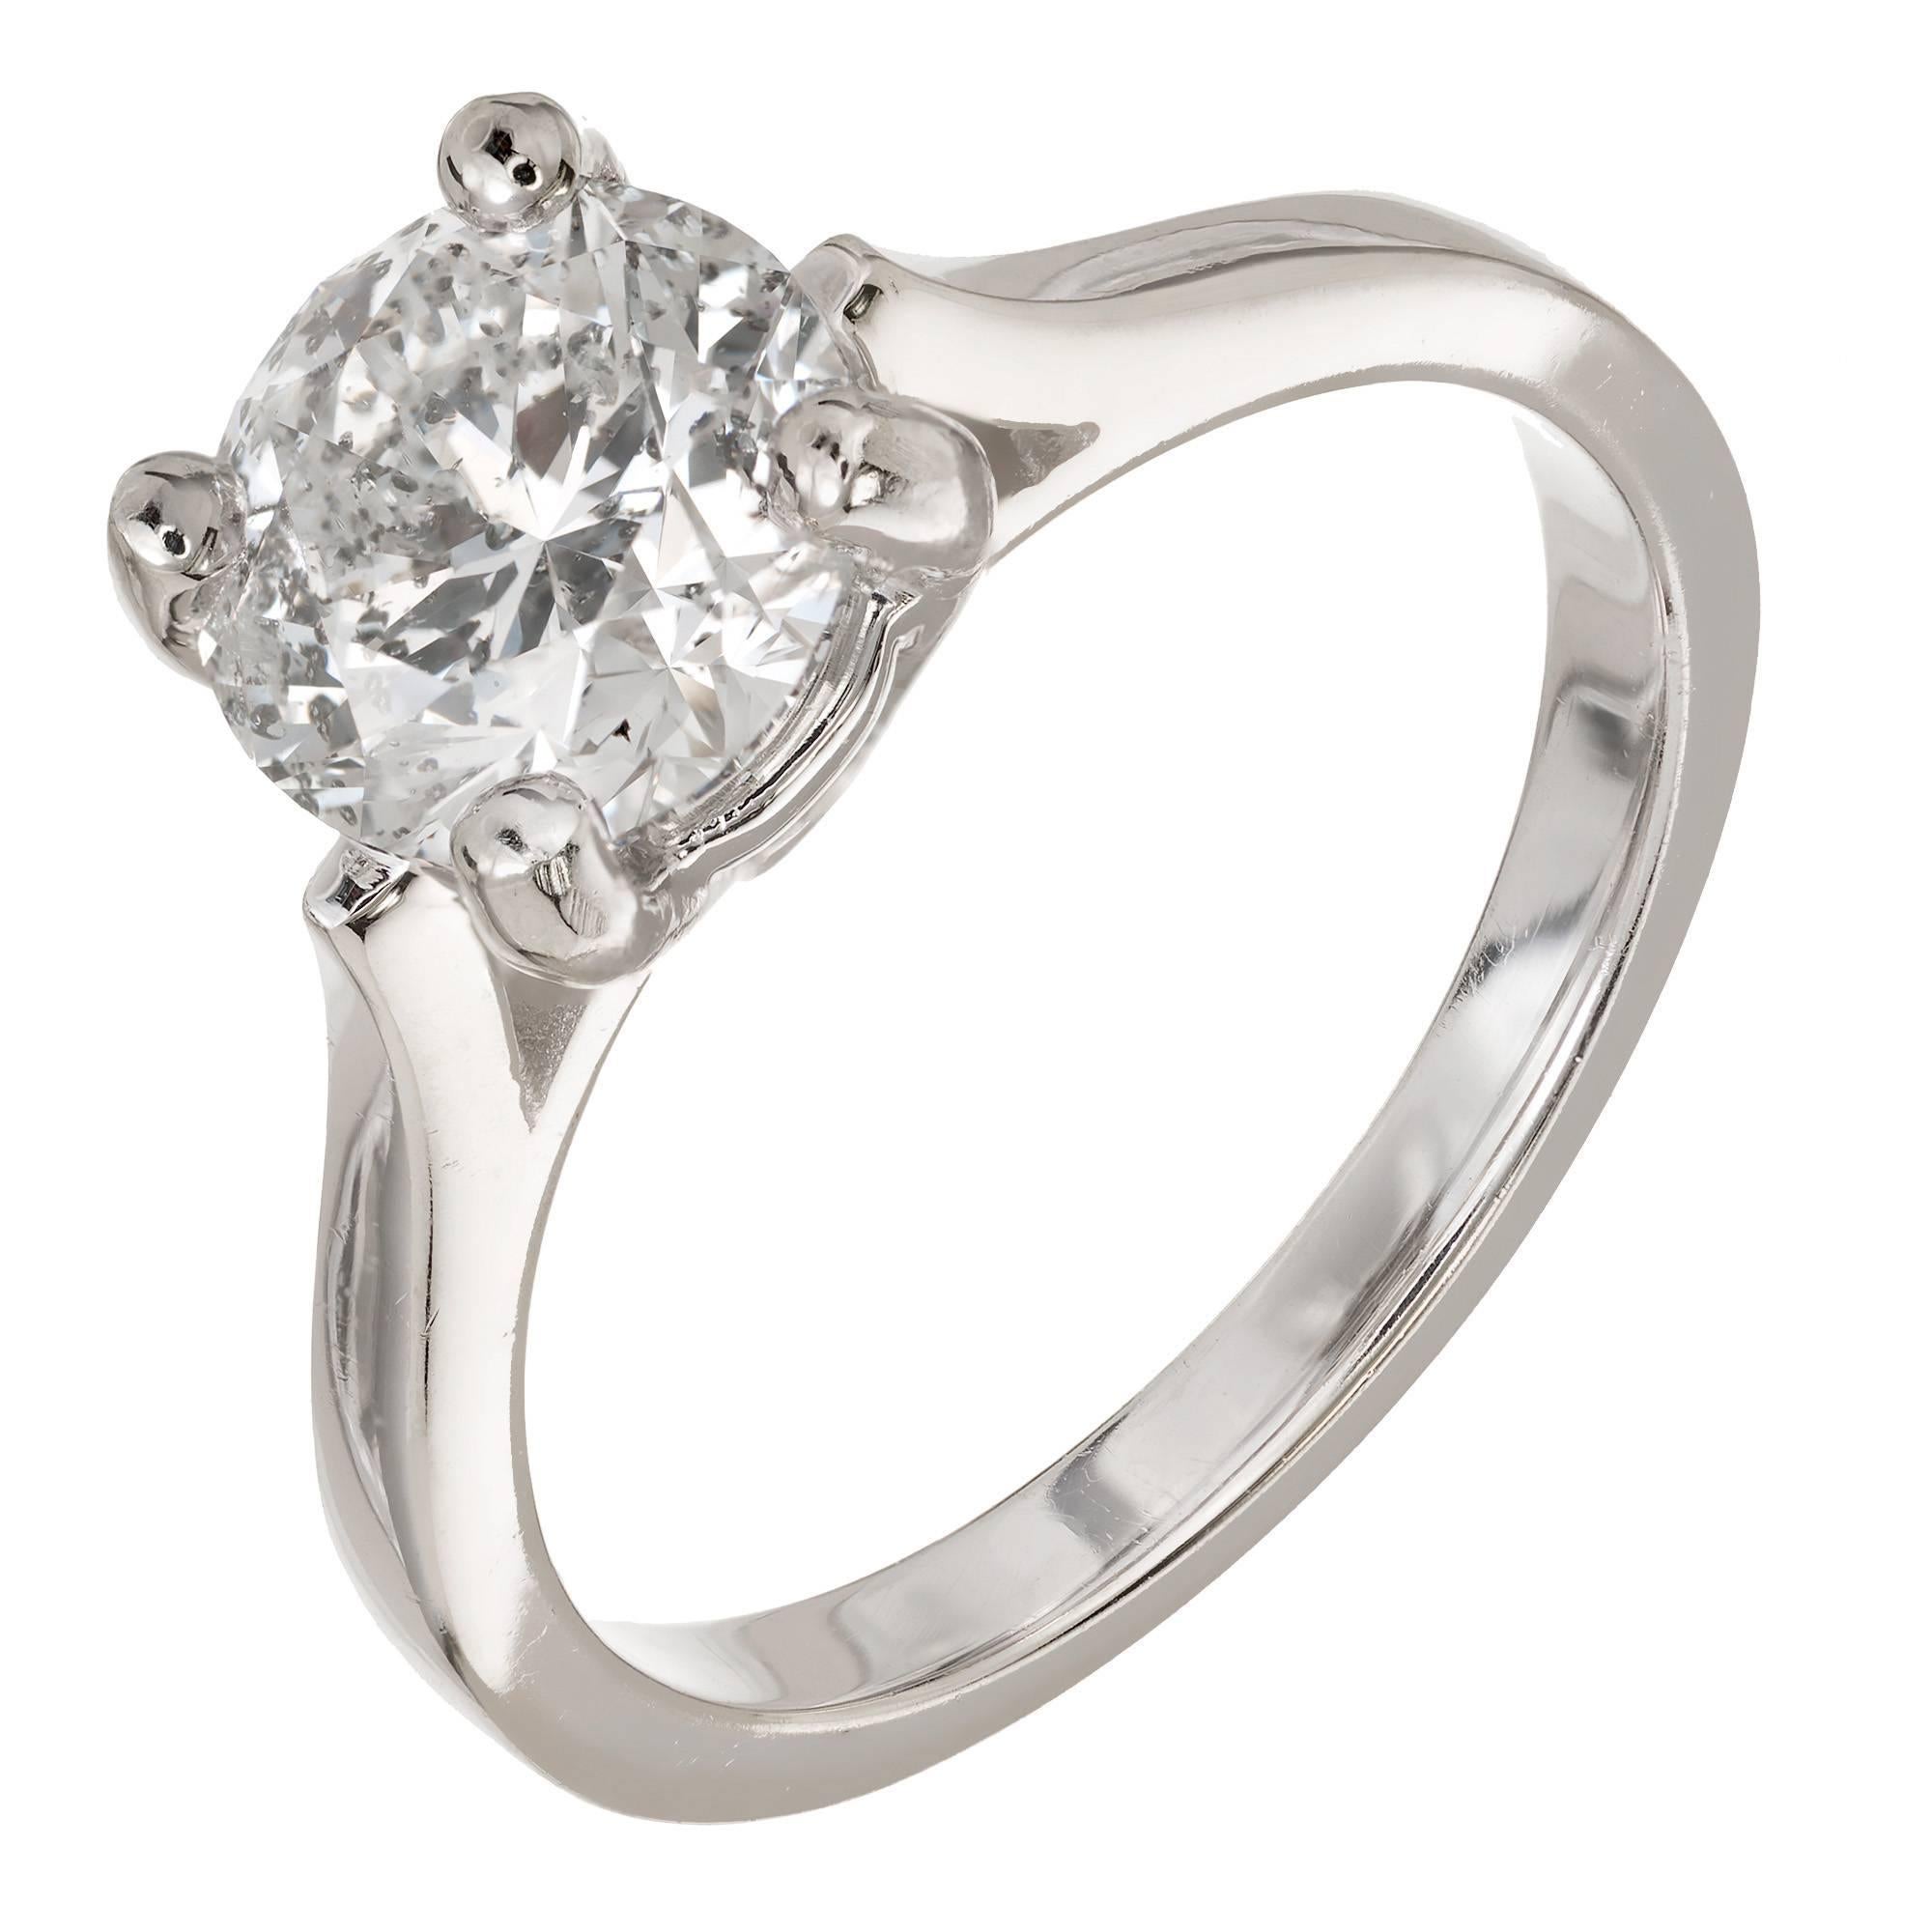 EGL Certified 1.91 Carat Round Diamond Gold Solitaire Engagement Ring